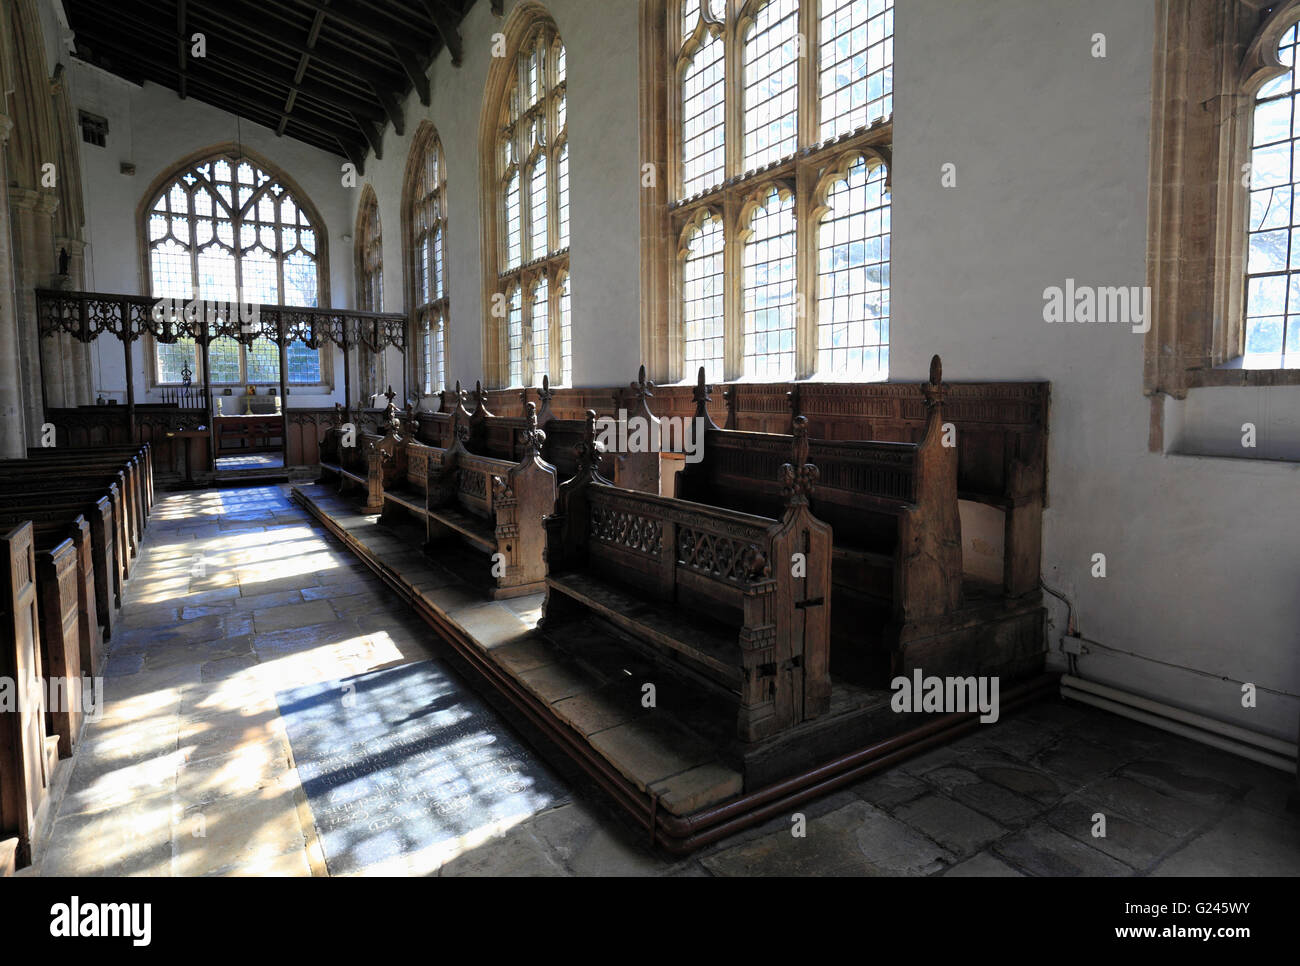 Pews in side aisle at the church of Walpole St Peter, Norfolk, England. Stock Photo